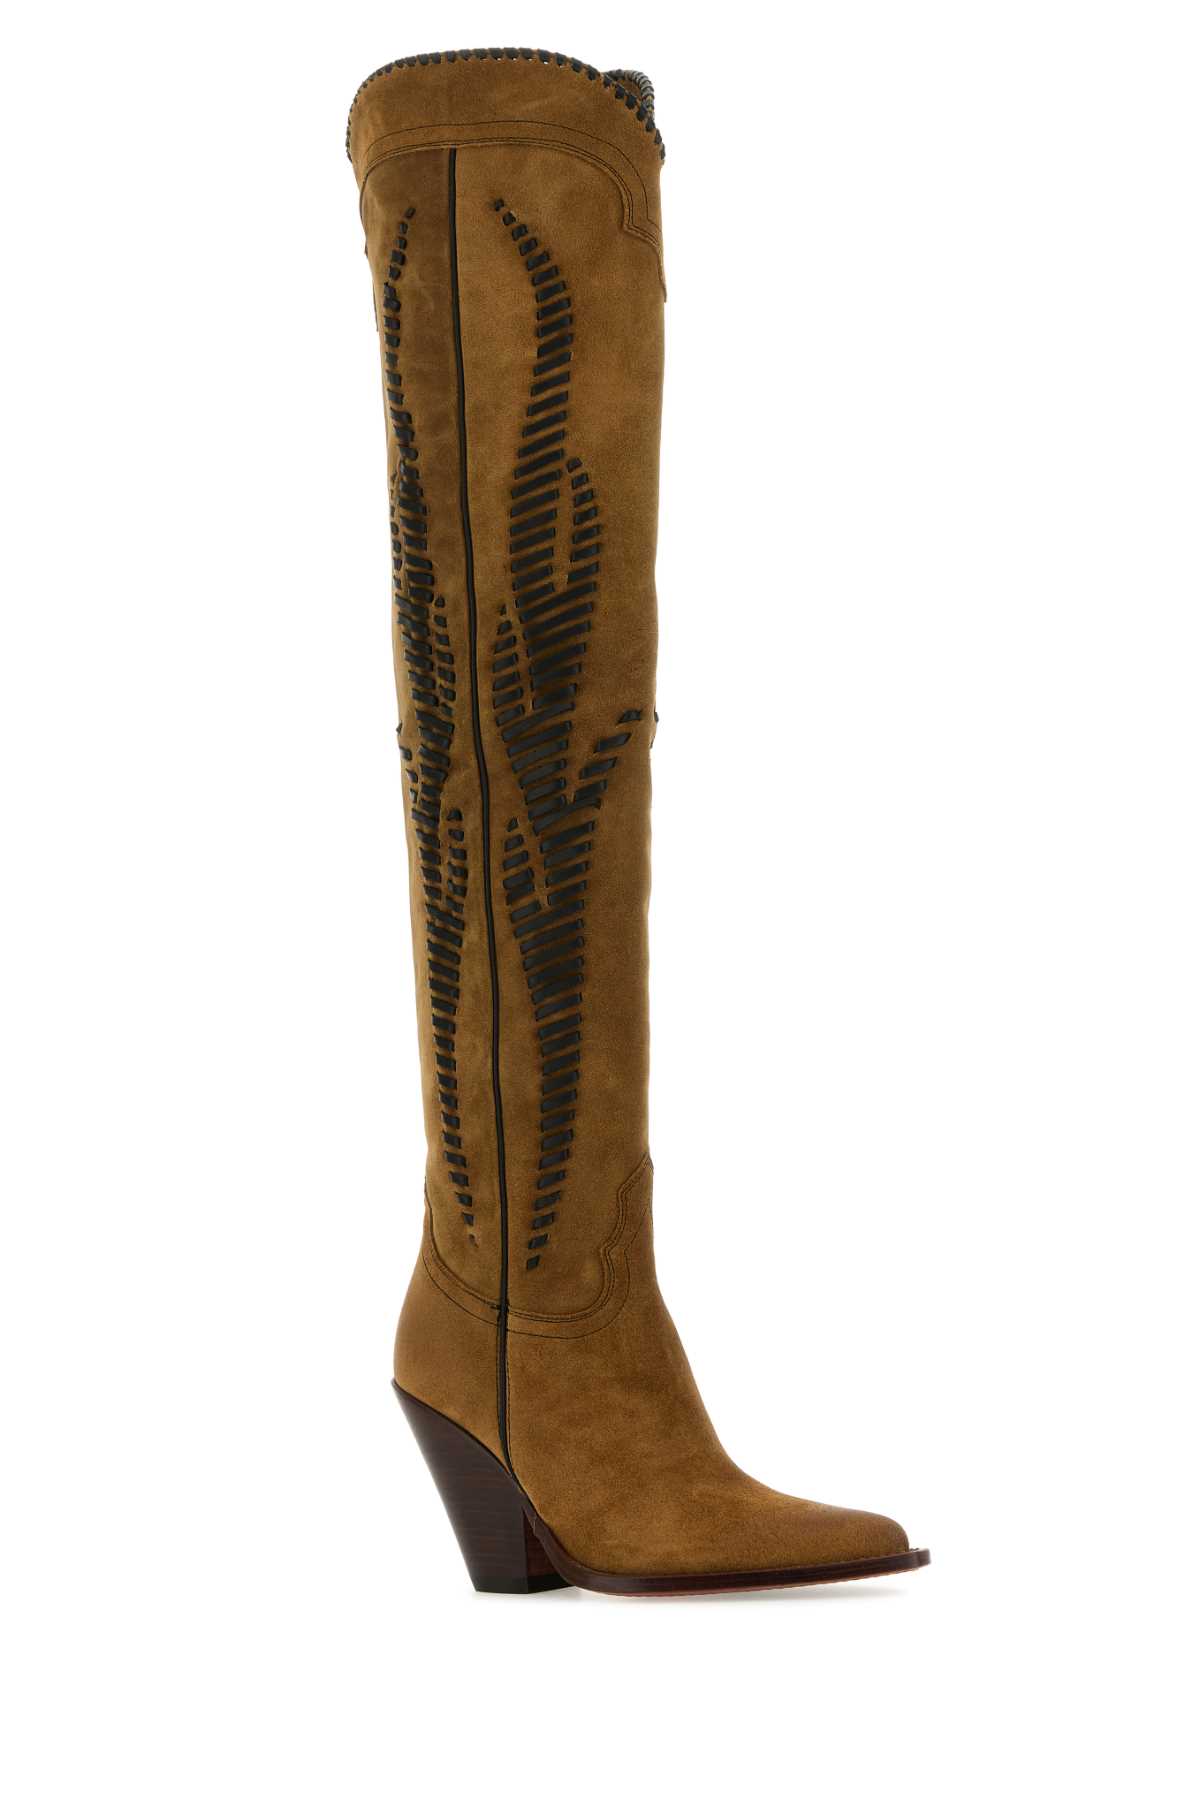 Shop Sonora Camel Suede Hermosa Twist Over-the-knee Boots